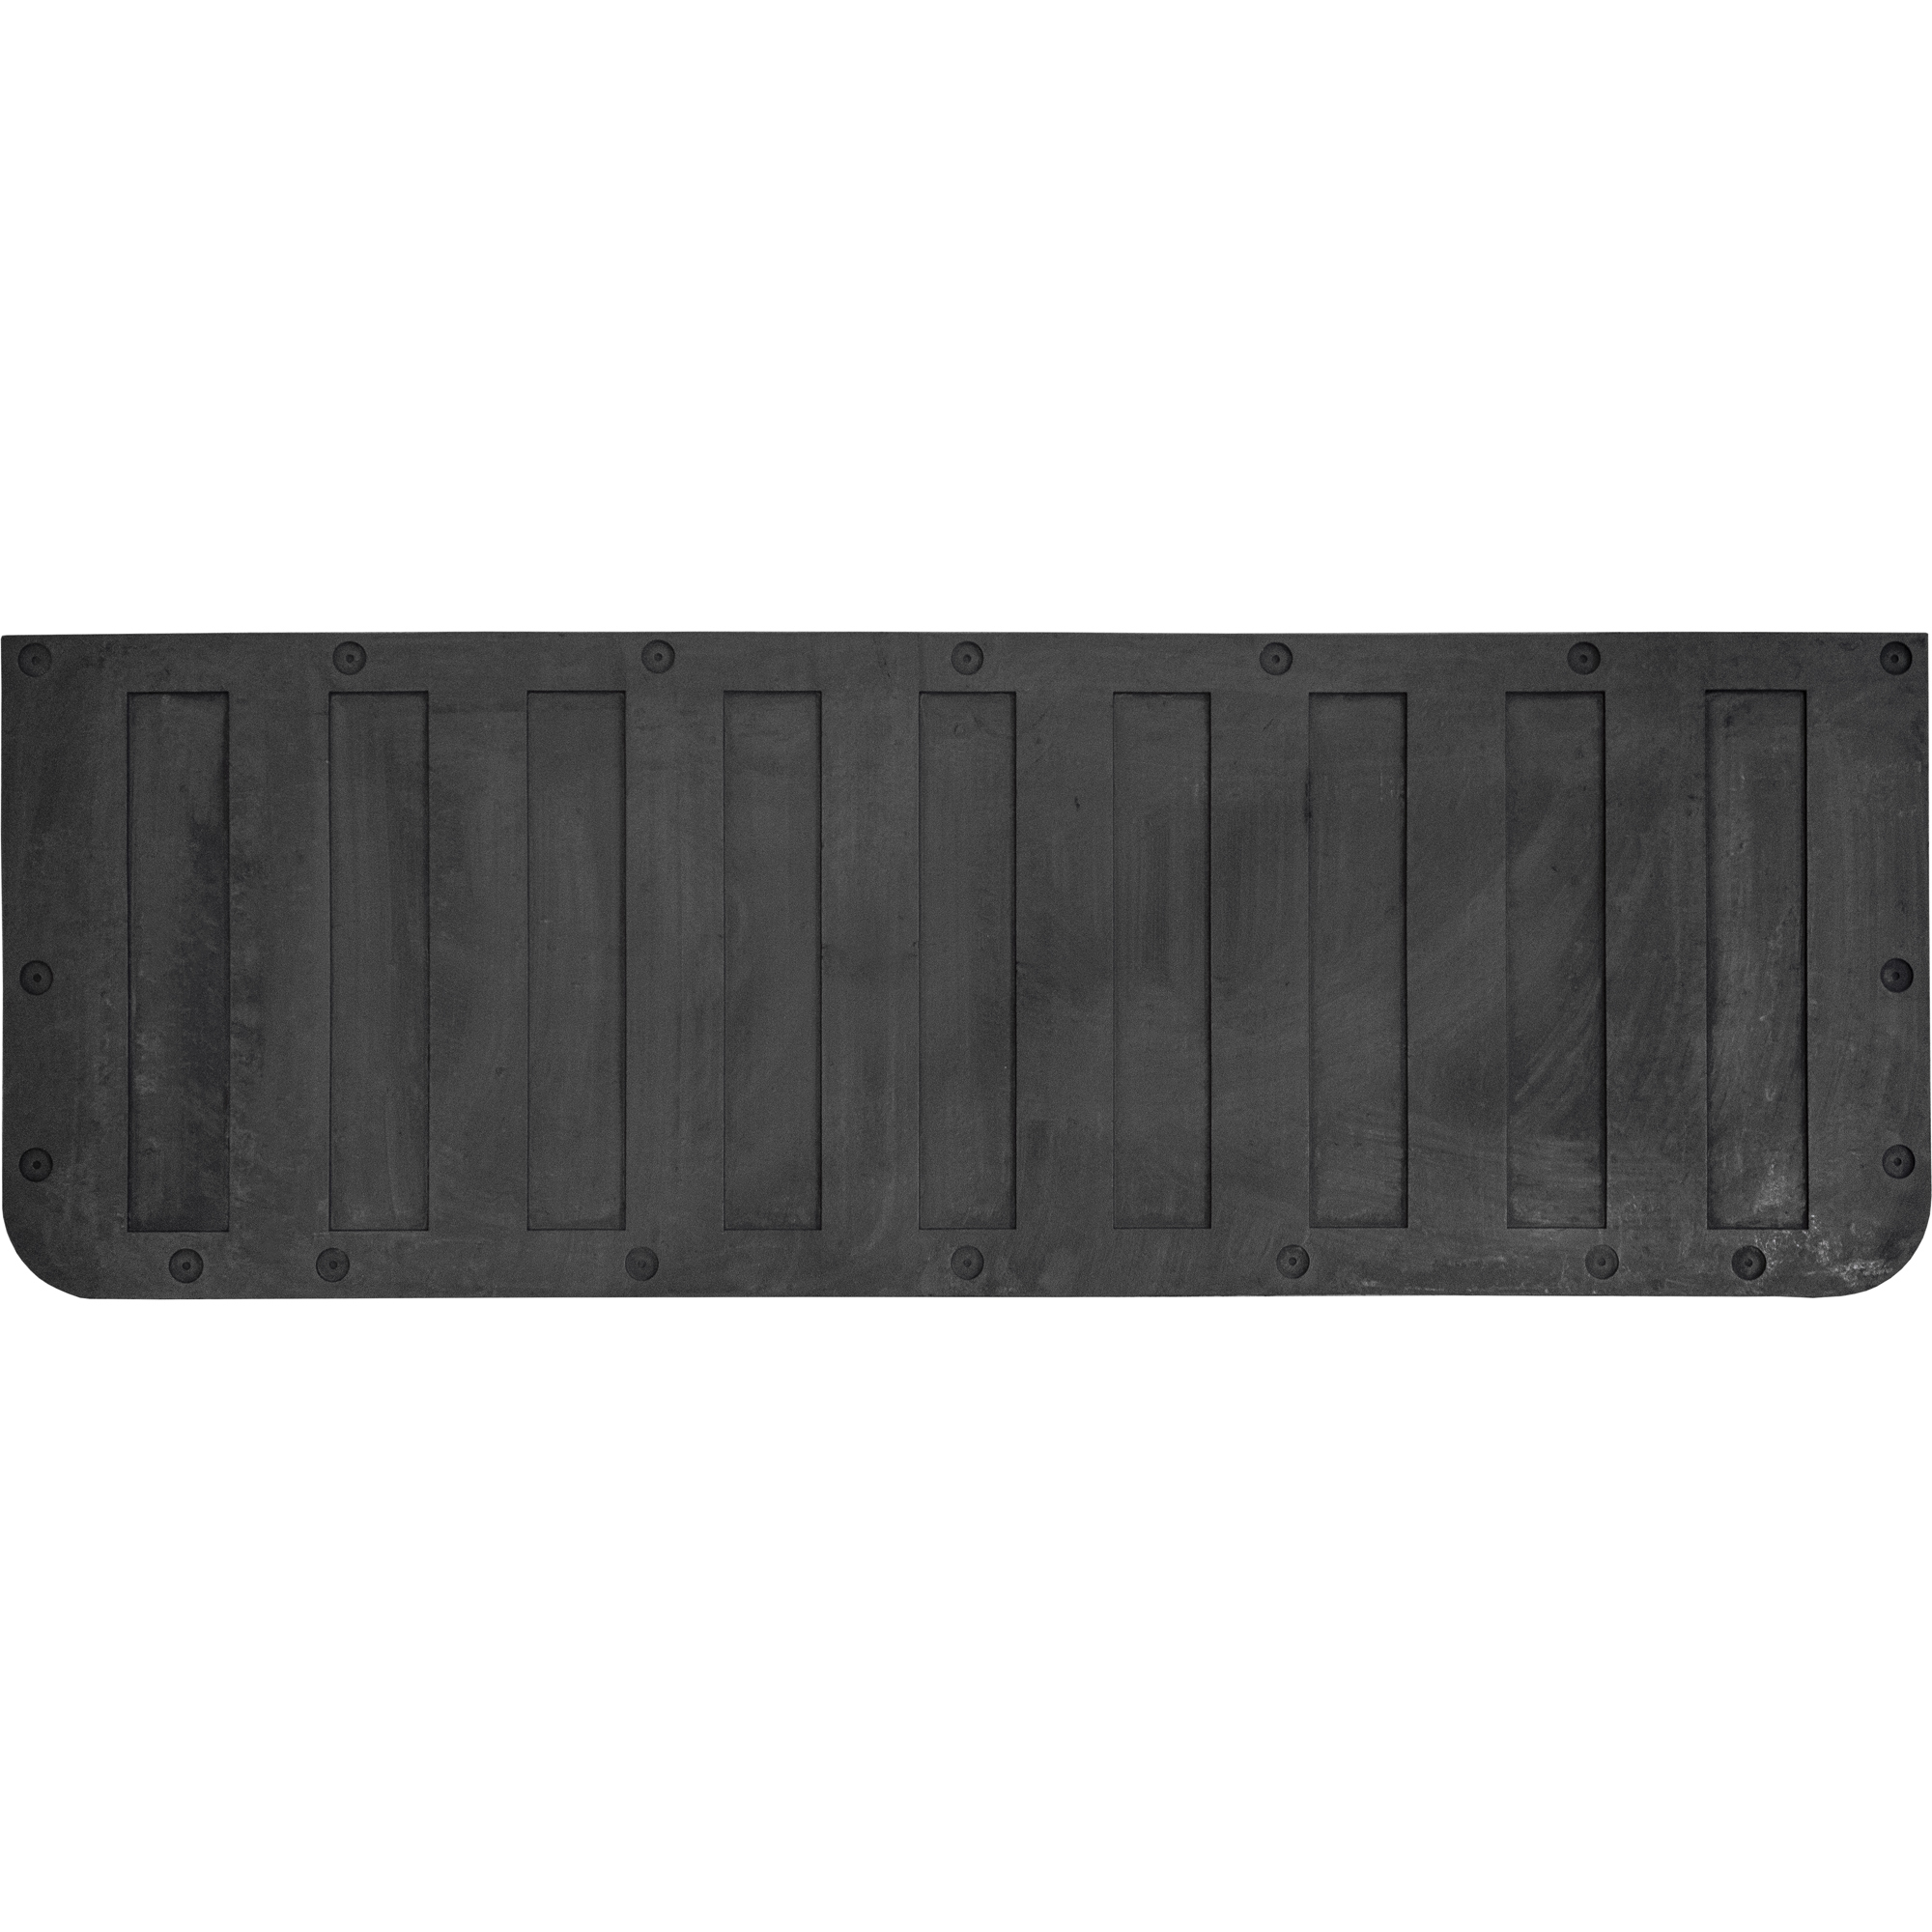 Boomerang Rubber, Toyota Tacoma Truck Tailgate Mat, Long/Short Bed, Primary Color Black, Model TM M BAGGED